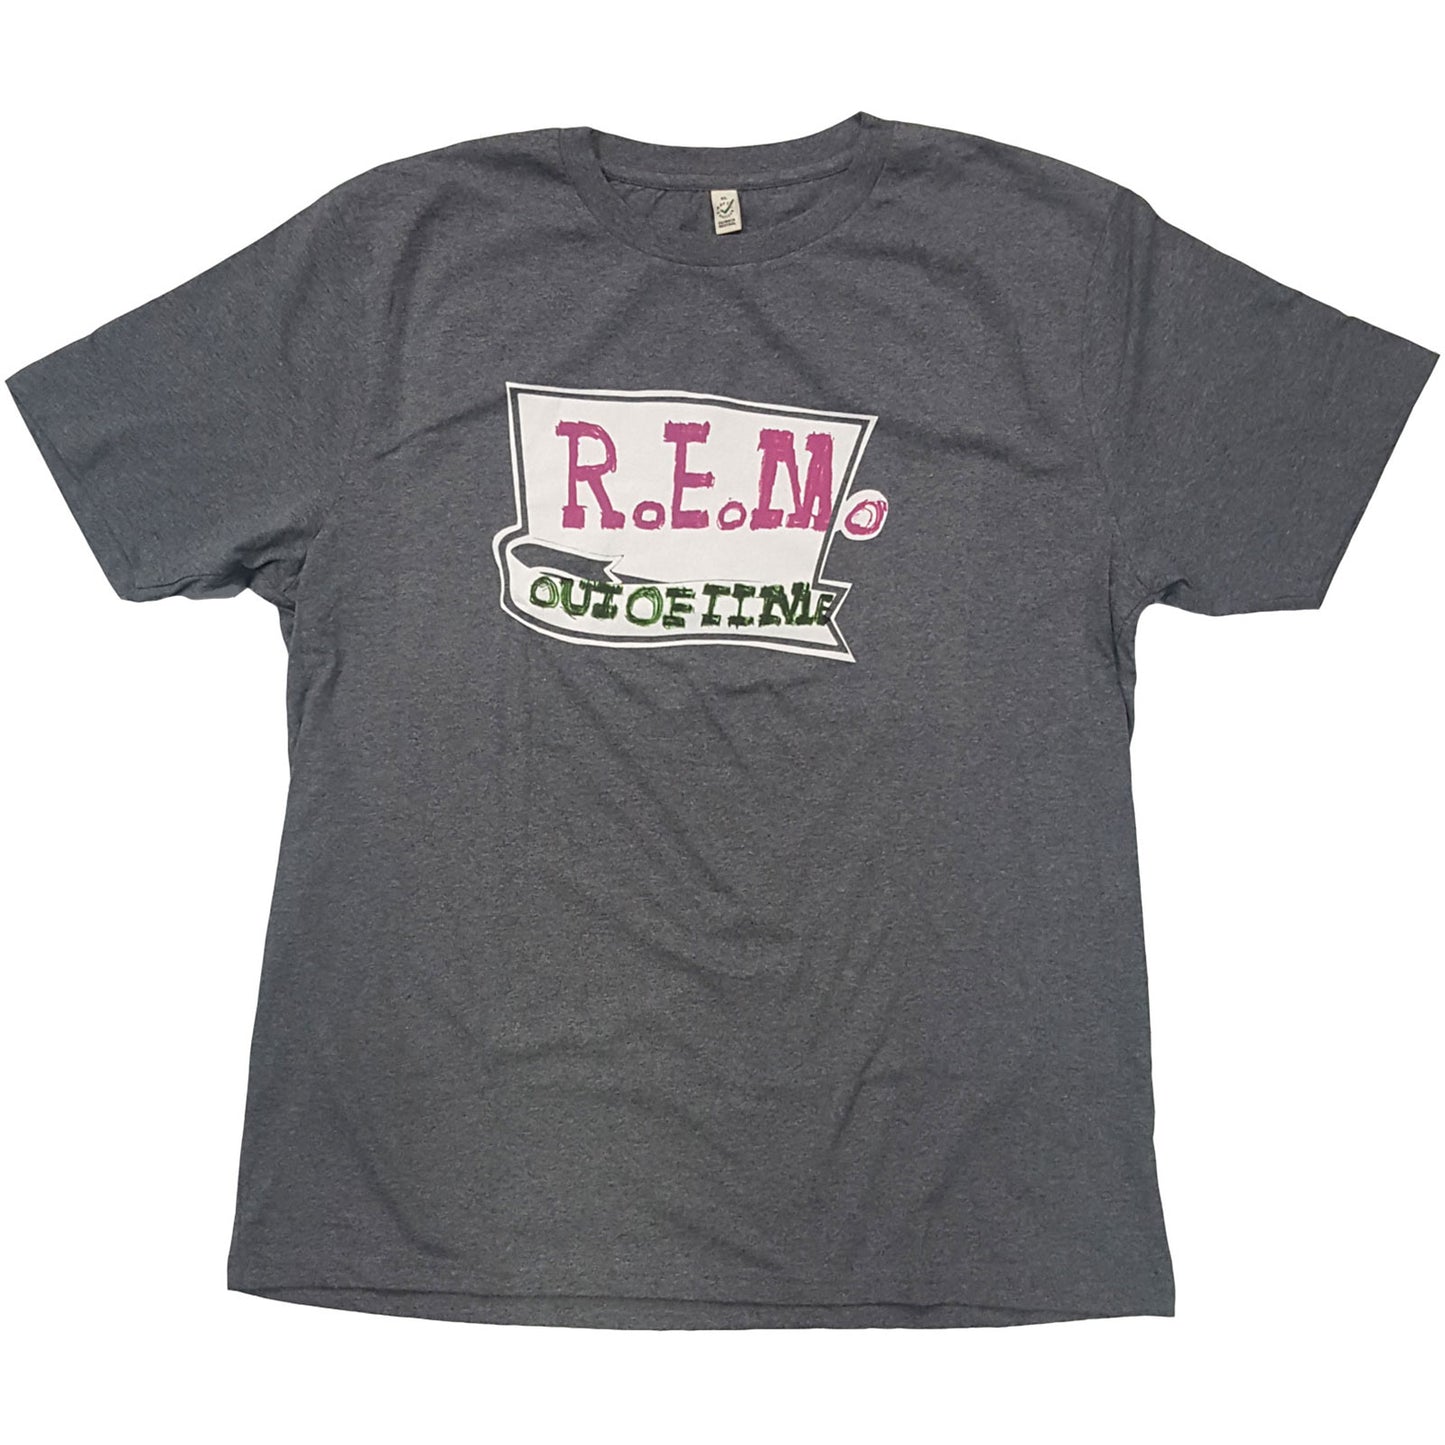 R.E.M. T-Shirt: Out Of Time